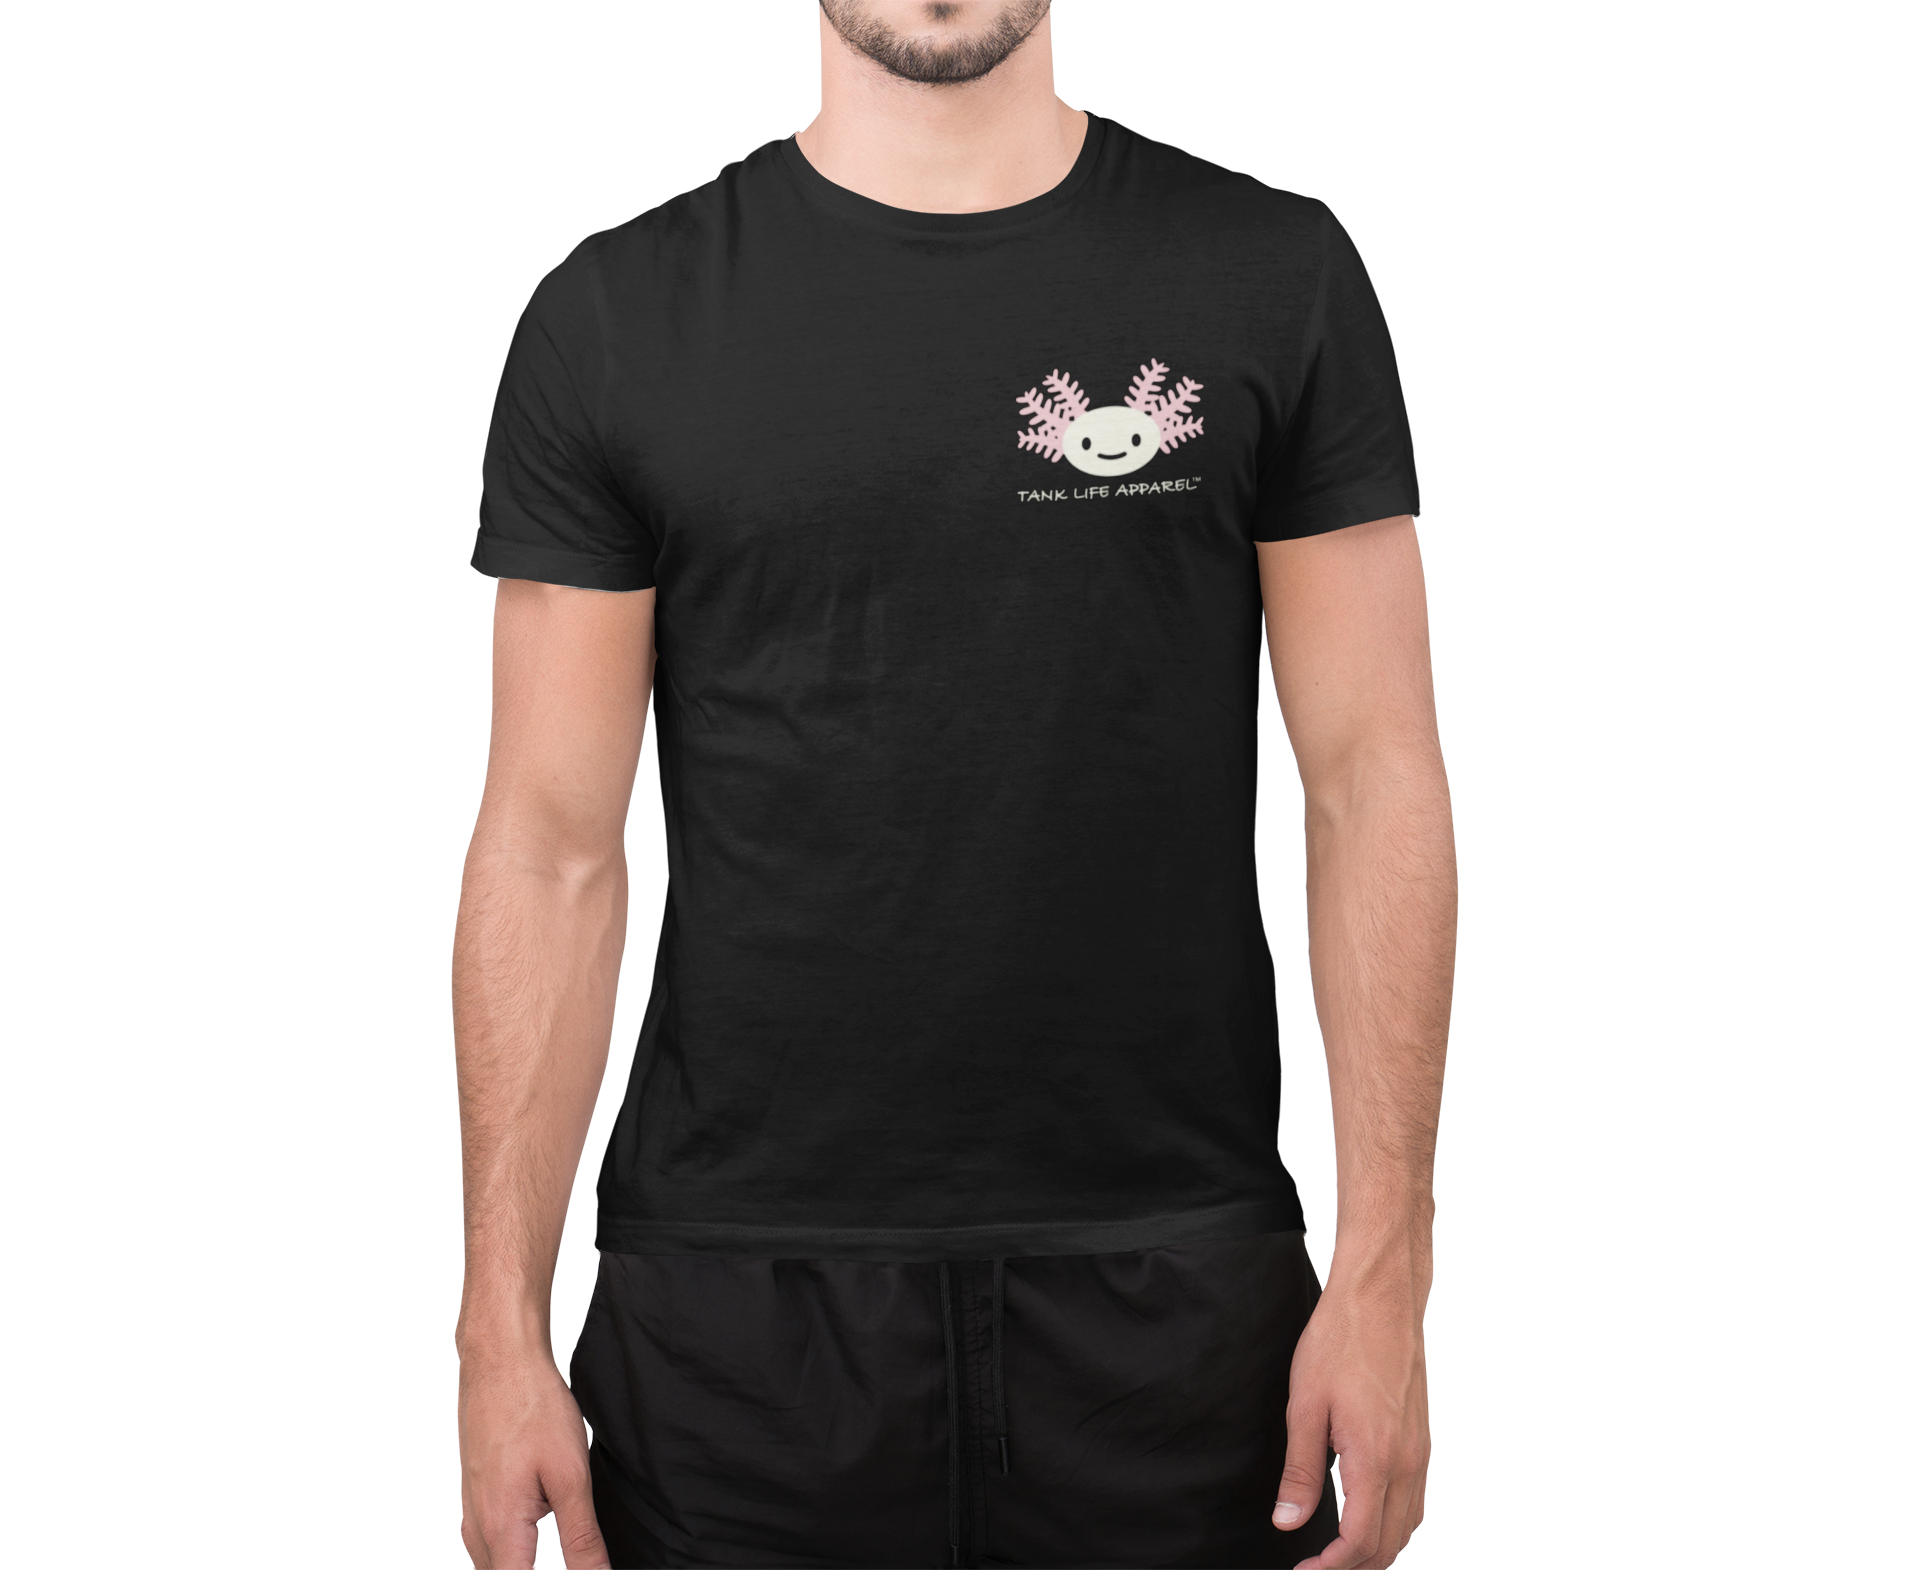 Tank Life Apparel axolotl design on a classic tee with our custom TLA sleeve label that gives this shirt an elevated look